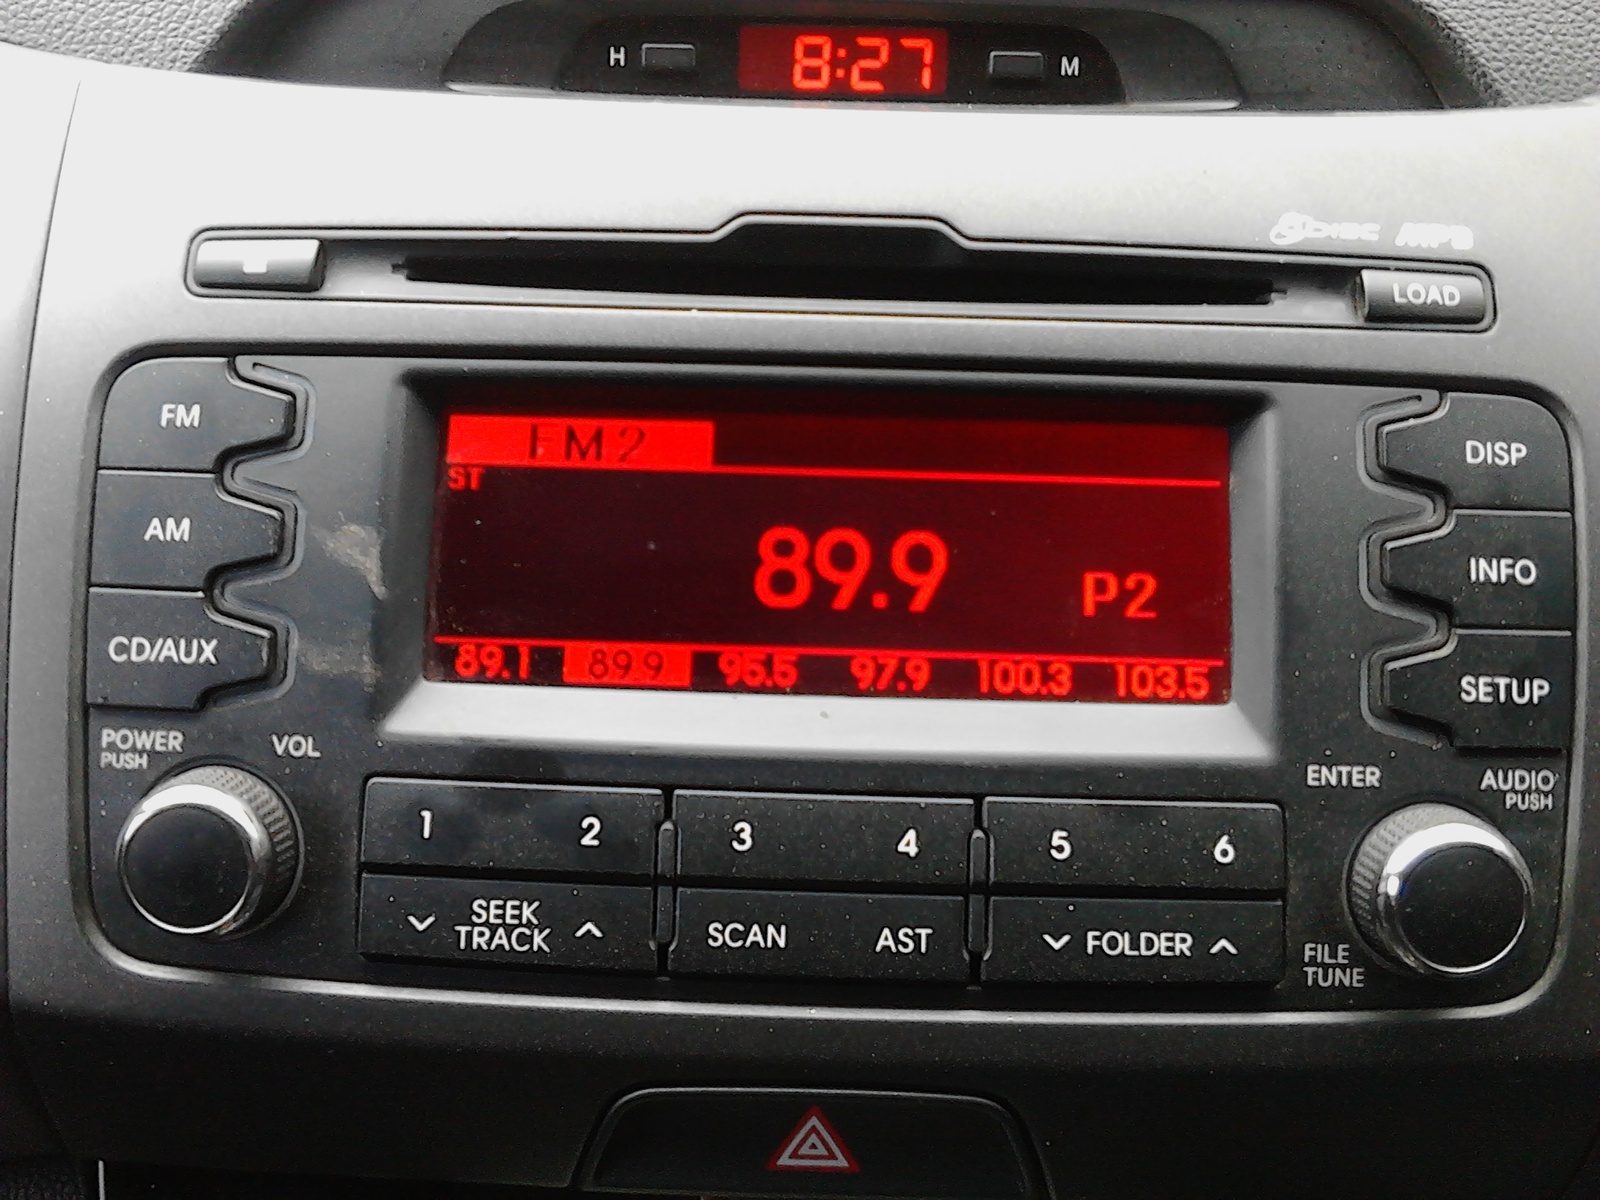 Kia Sportage Questions - What to do if there is no sound ... kia rio stereo wiring diagram 